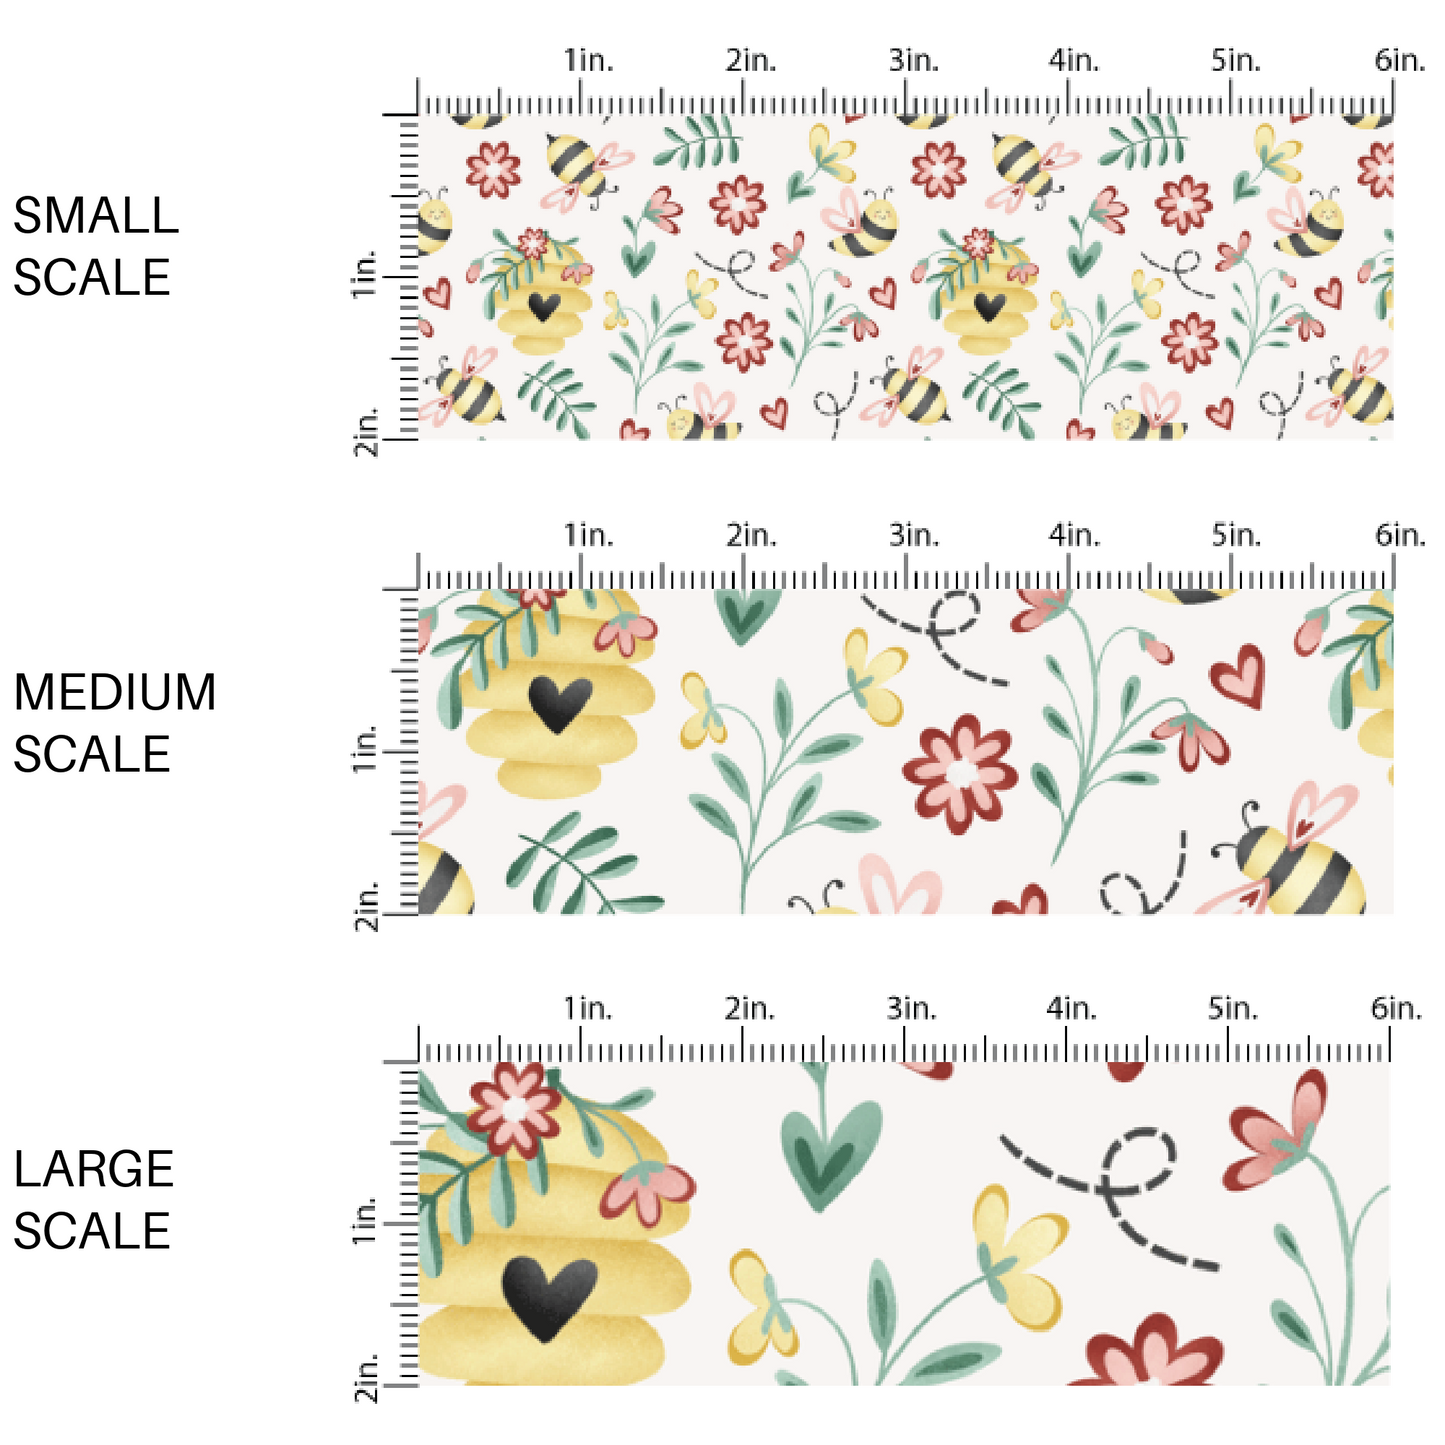 Cream fabric by the yard scaled image guide with bumblebees, beehives, hearts, and flowers